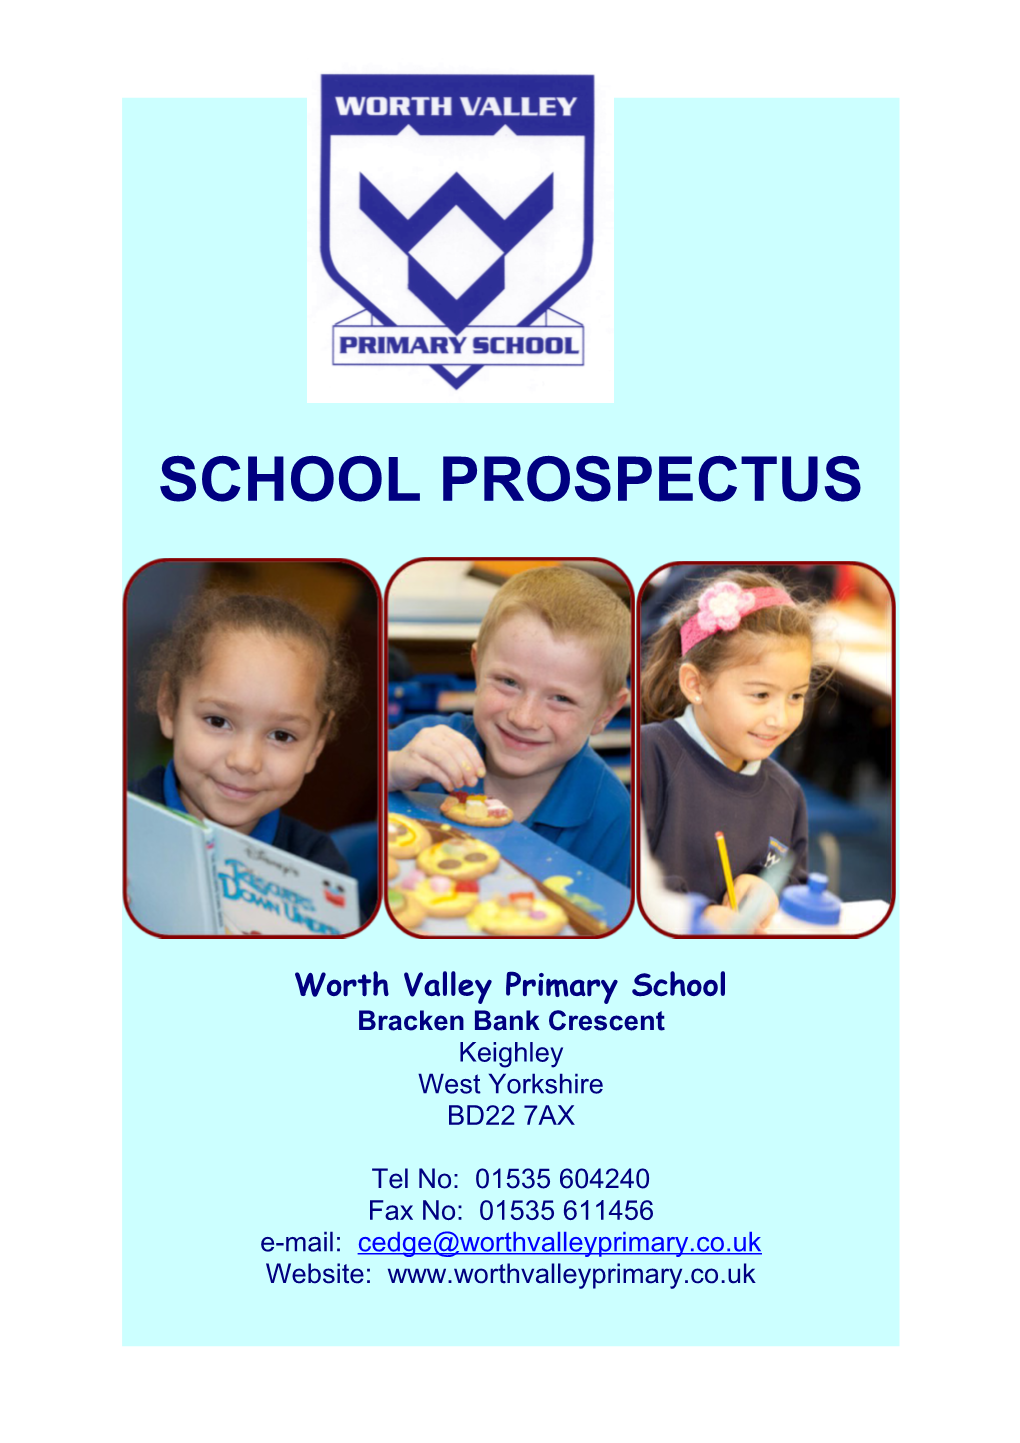 Welcome to Worth Valley Primary School